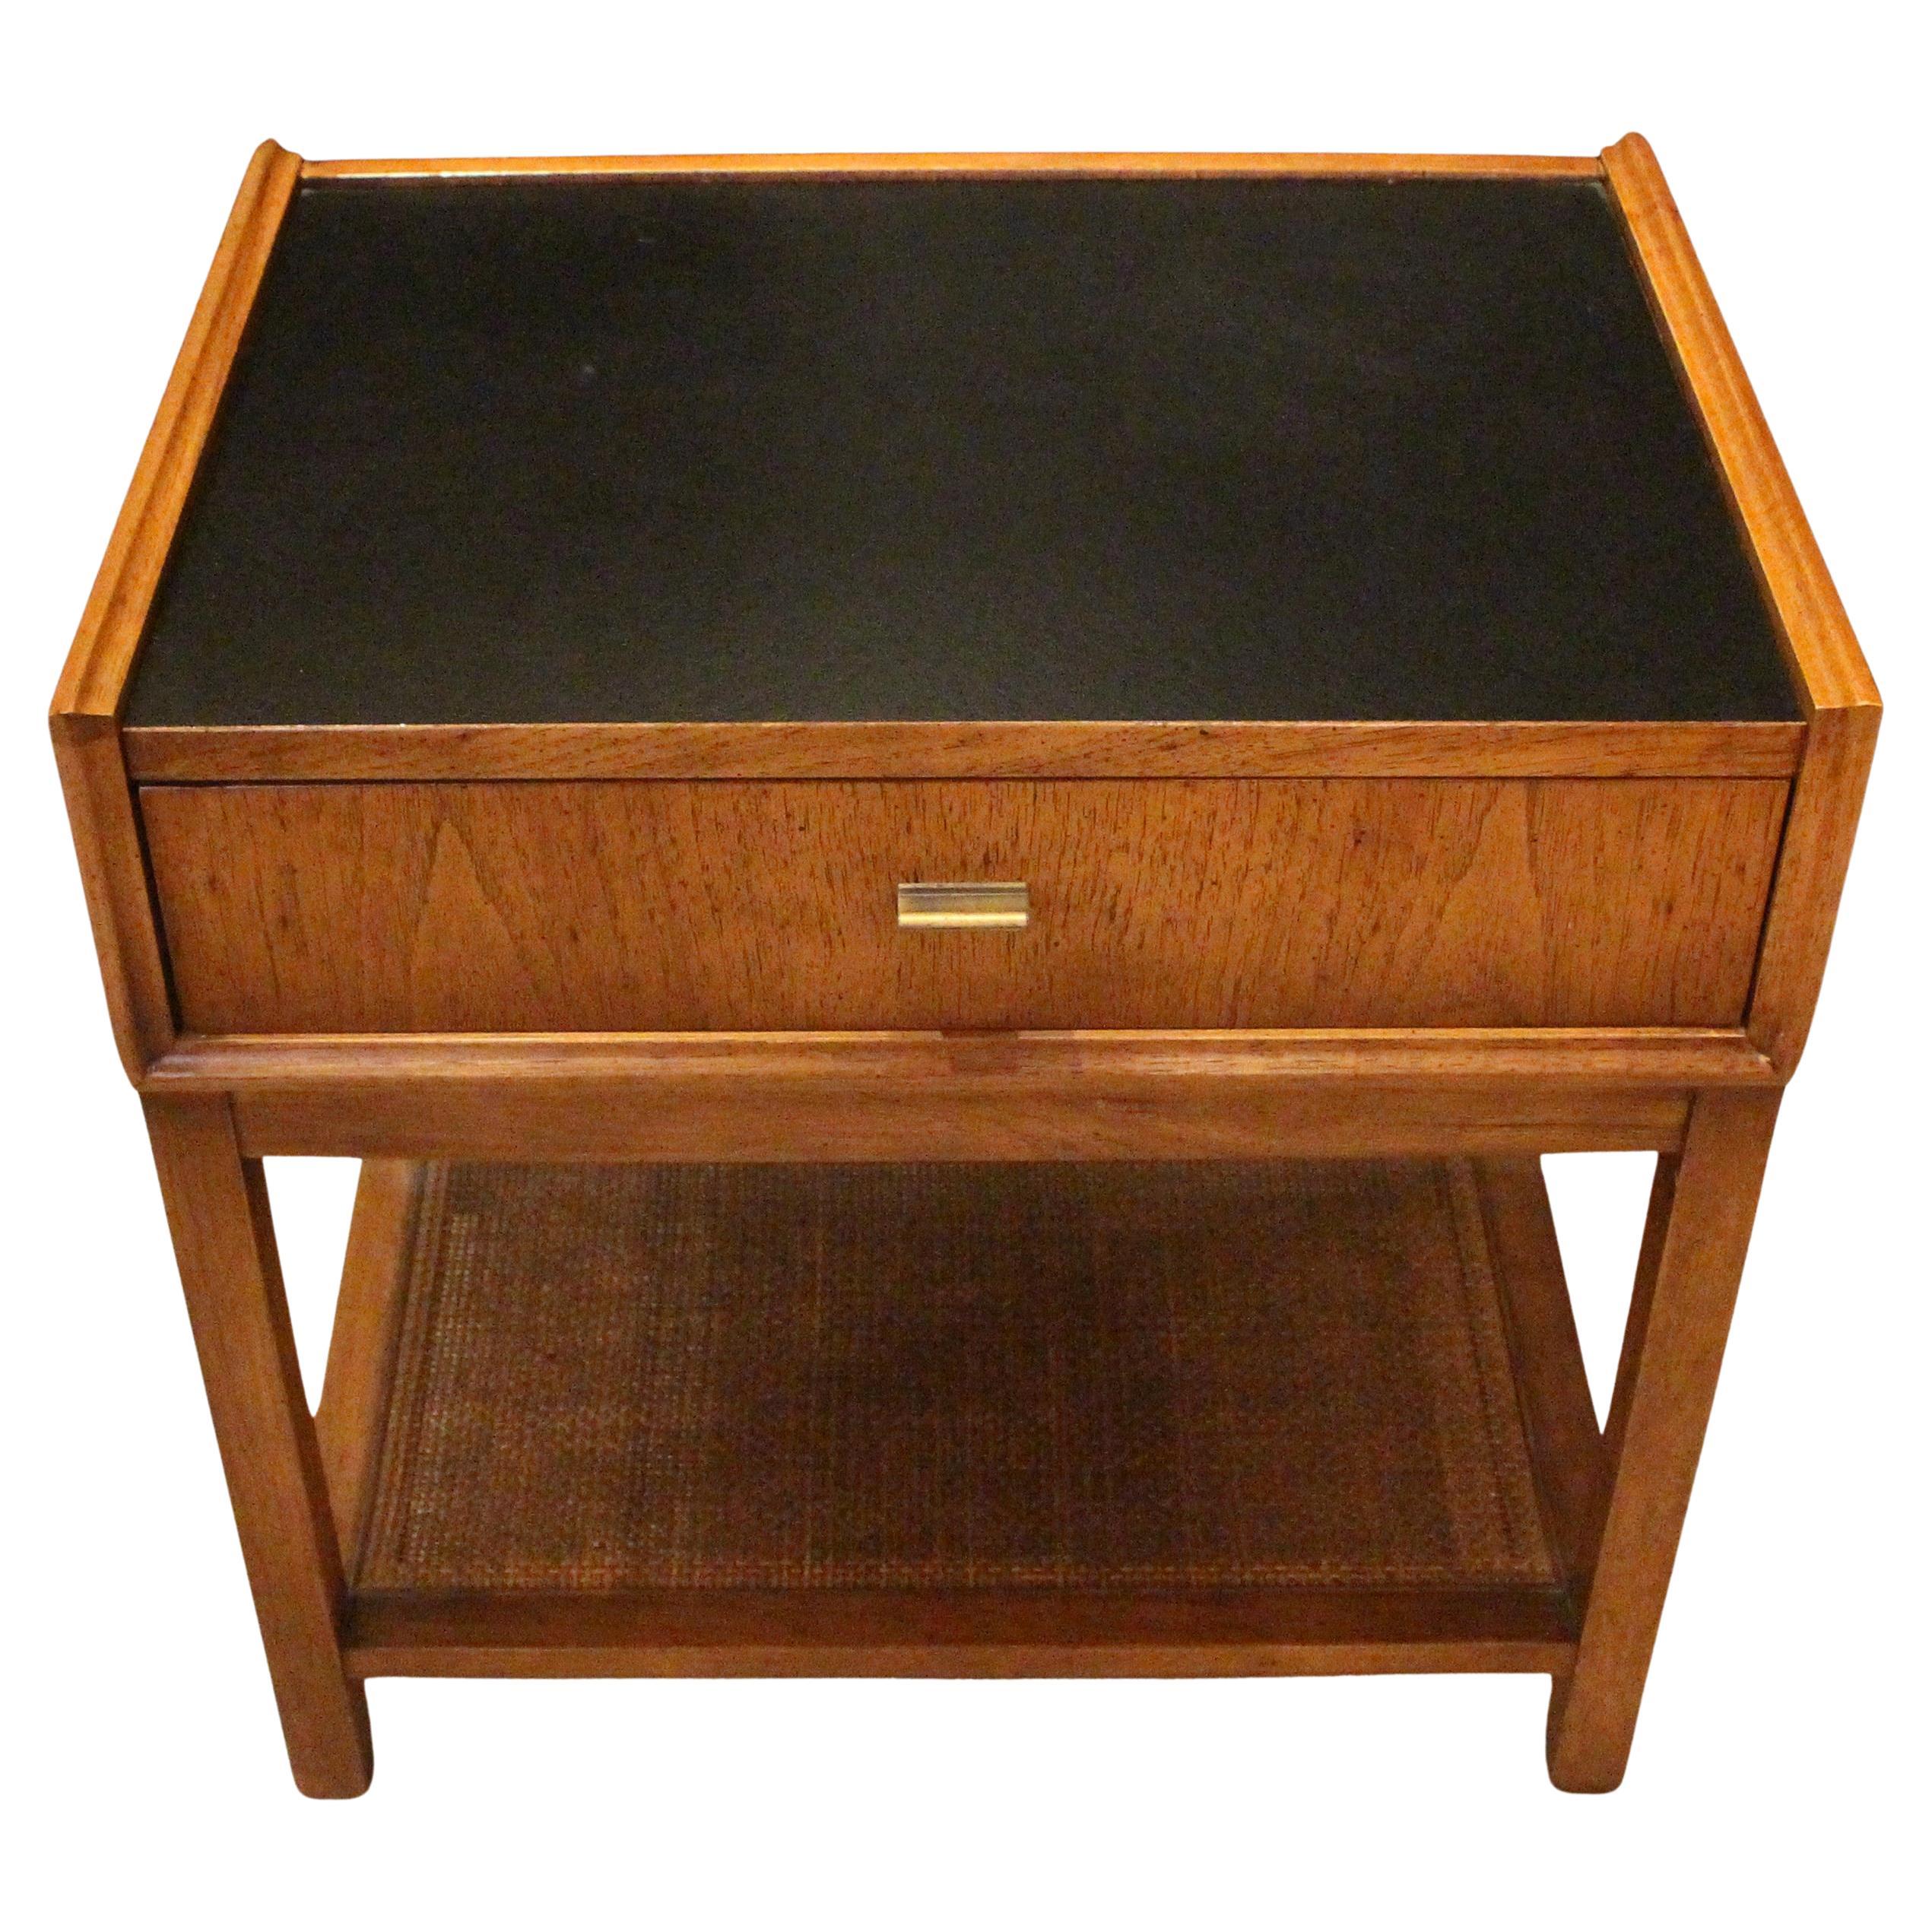 Circa 1960s Mid-Century Modern Night Stand by Founders For Sale